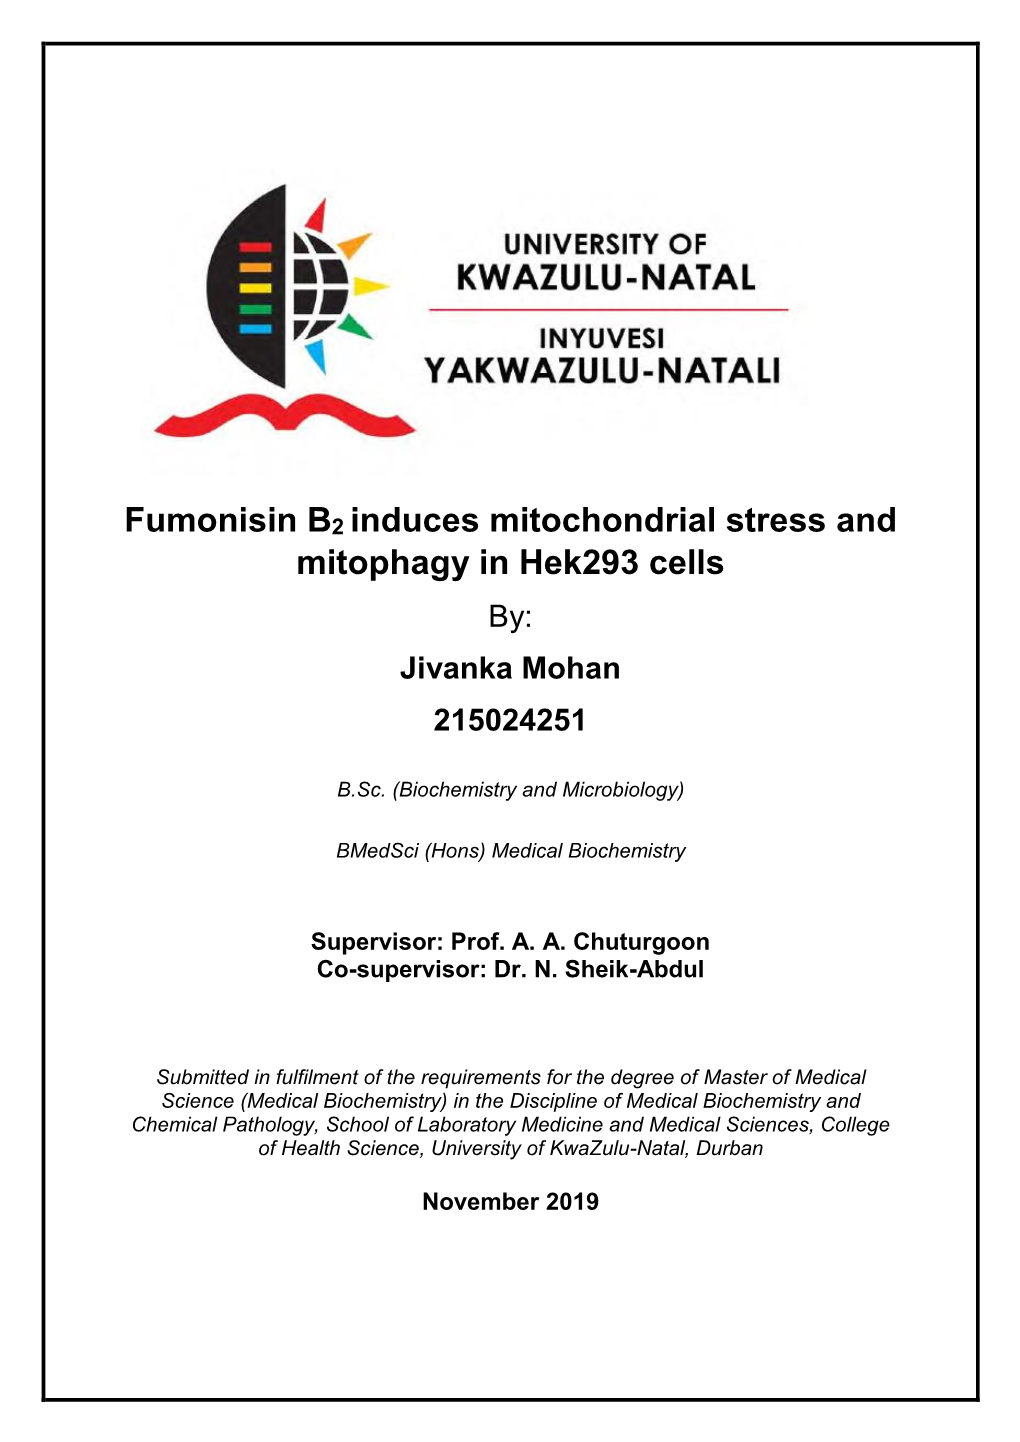 Fumonisin B2 Induces Mitochondrial Stress and Mitophagy in Hek293 Cells By: Jivanka Mohan 215024251